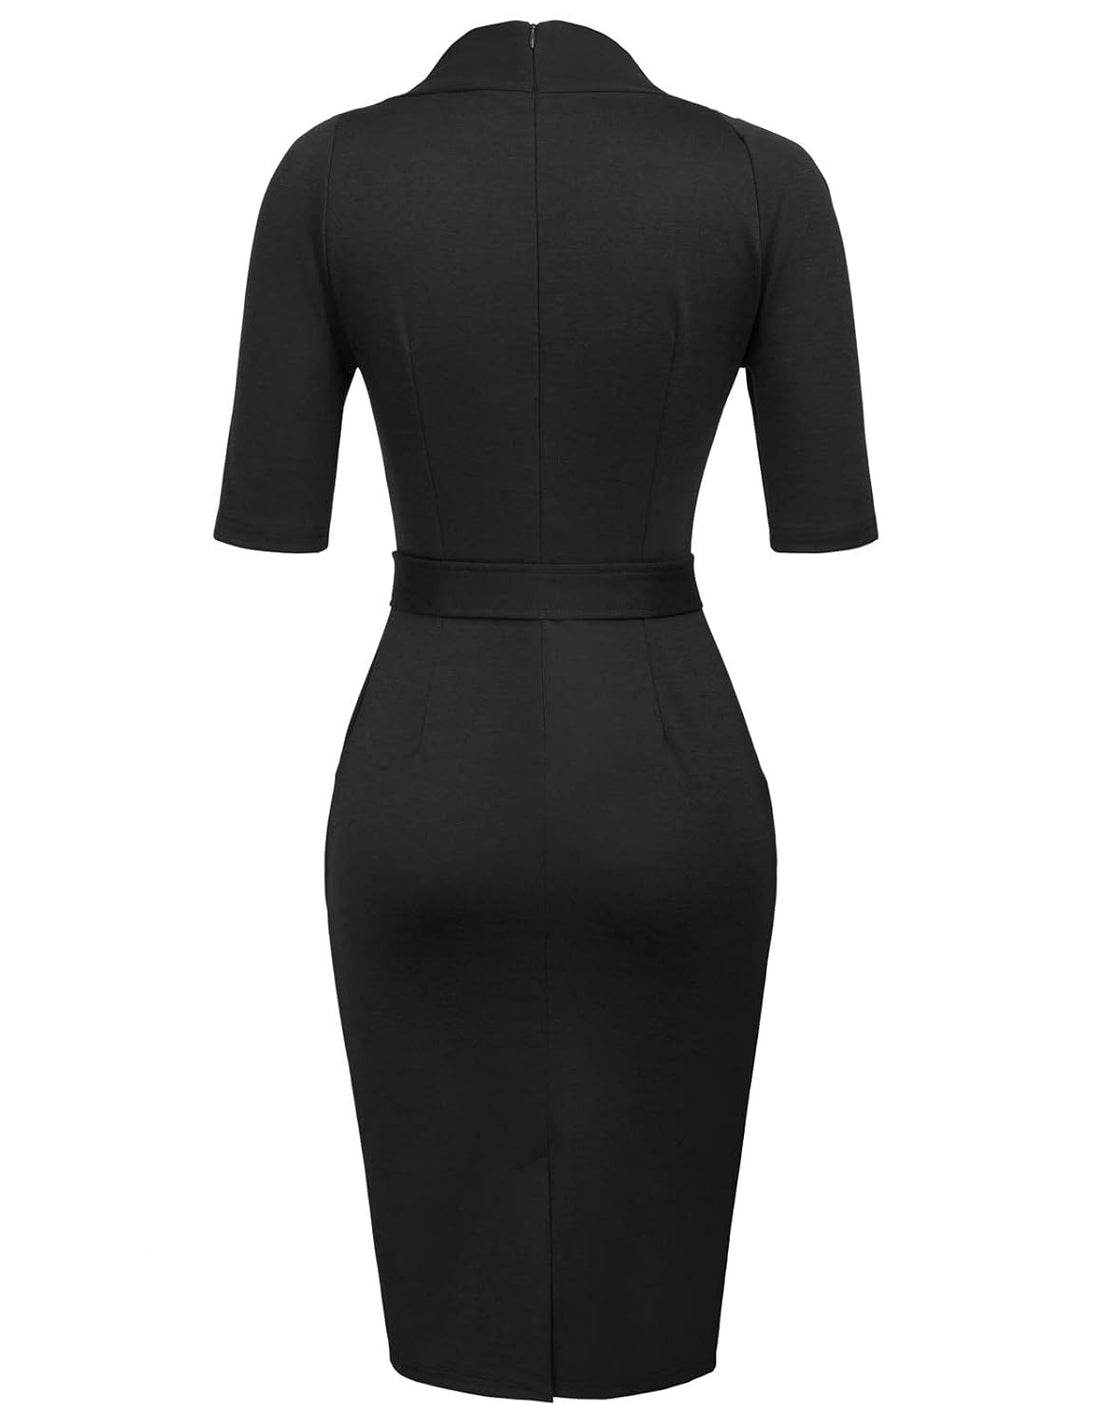 GRACE KARIN Women's Short Sleeve Bodycon Dress Belted Business Cocktail Funeral Pencil Dress with Procket